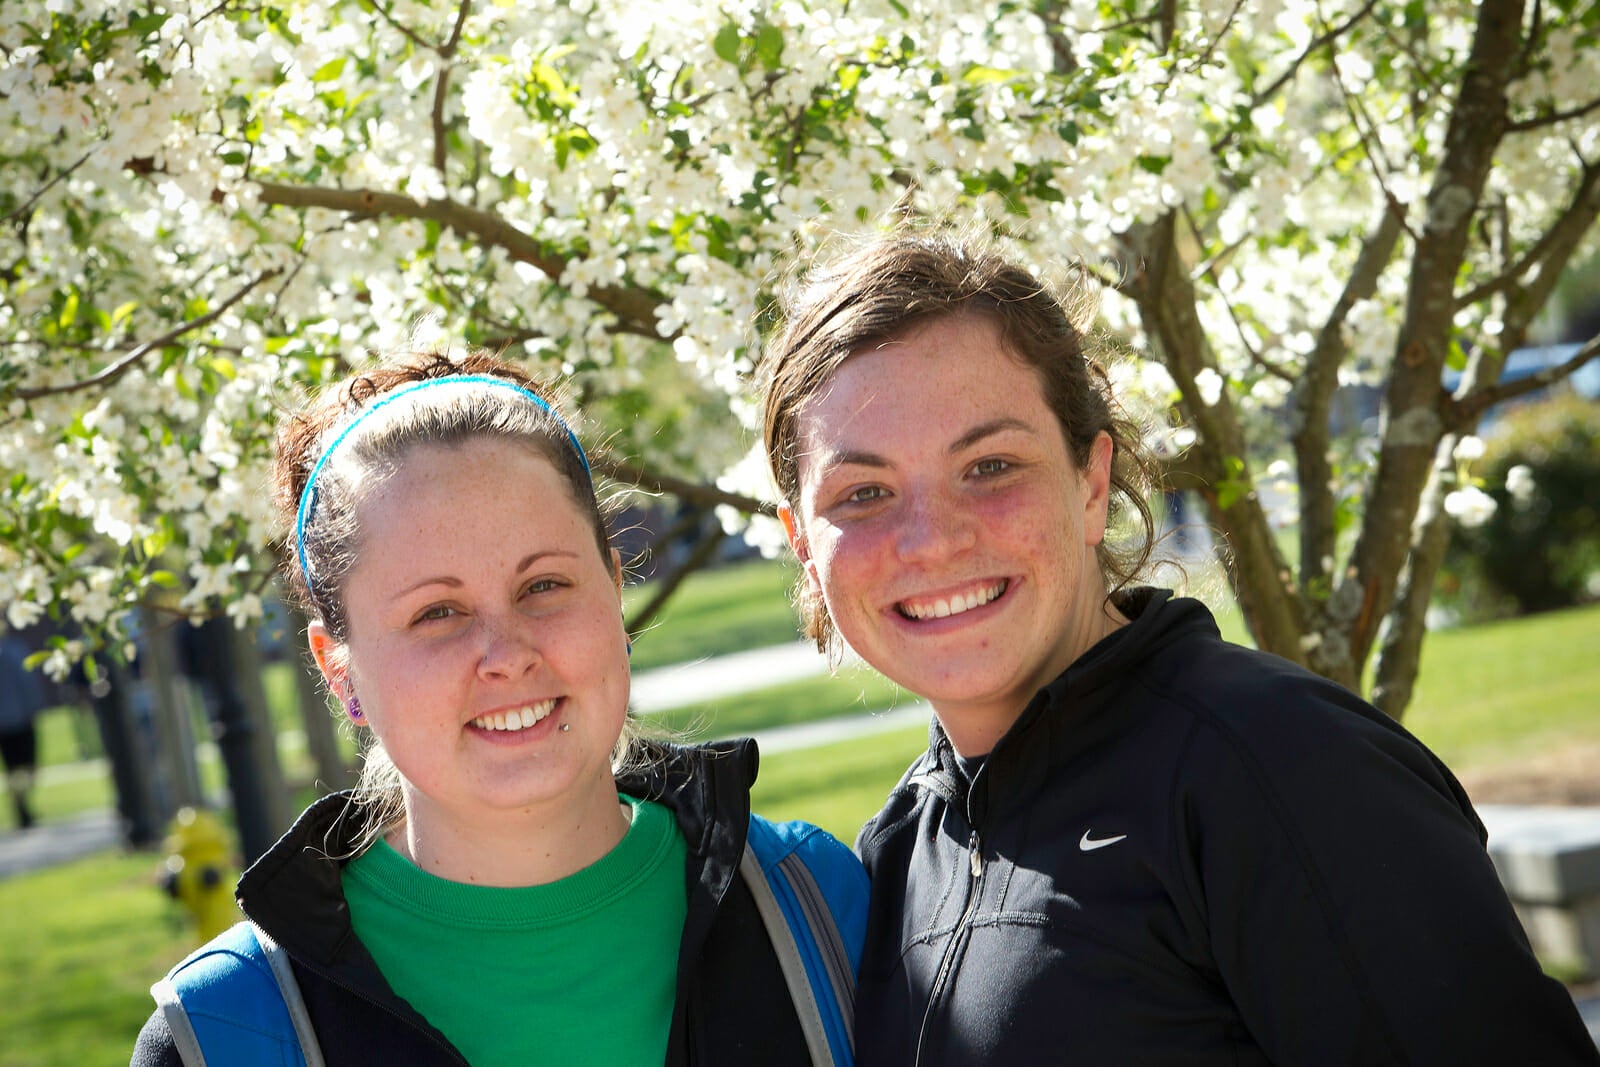 Students smiling in front of flowering dogwood trees